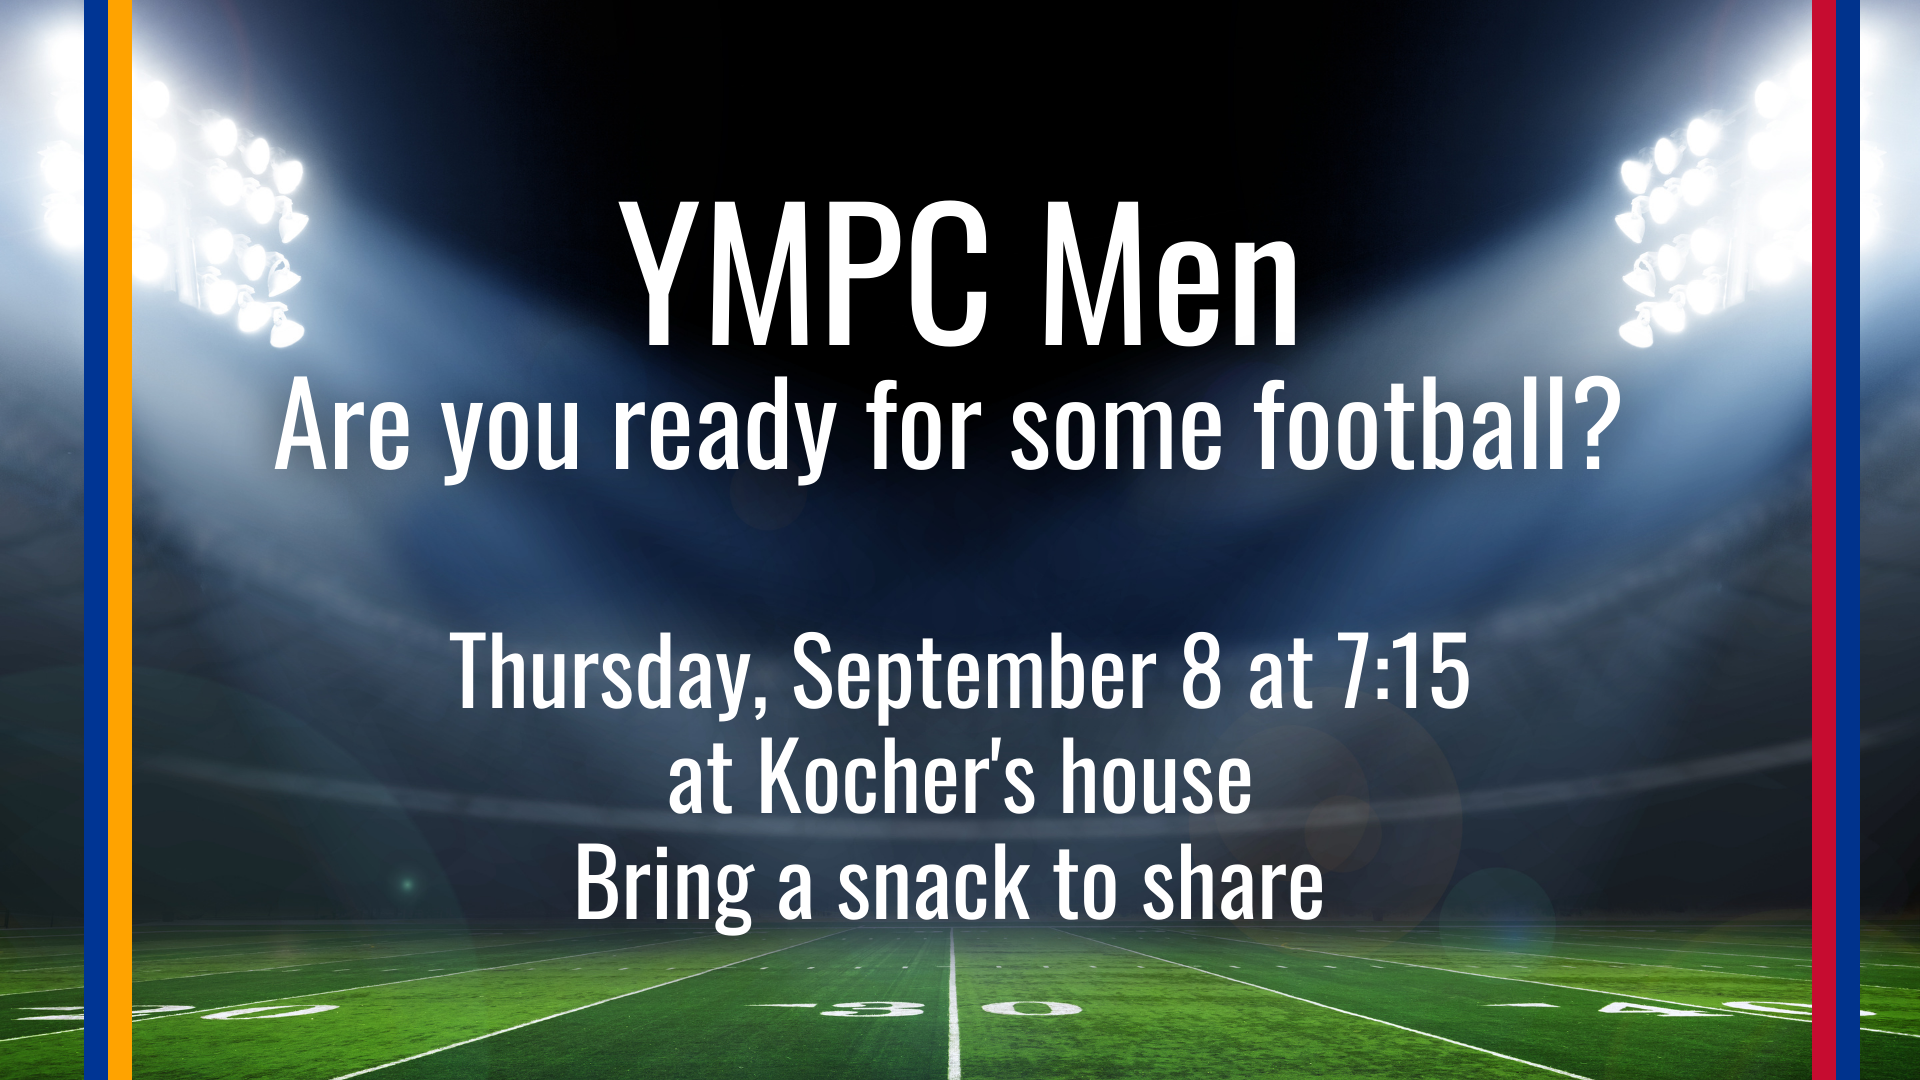 YMPC Men Are you ready for some football